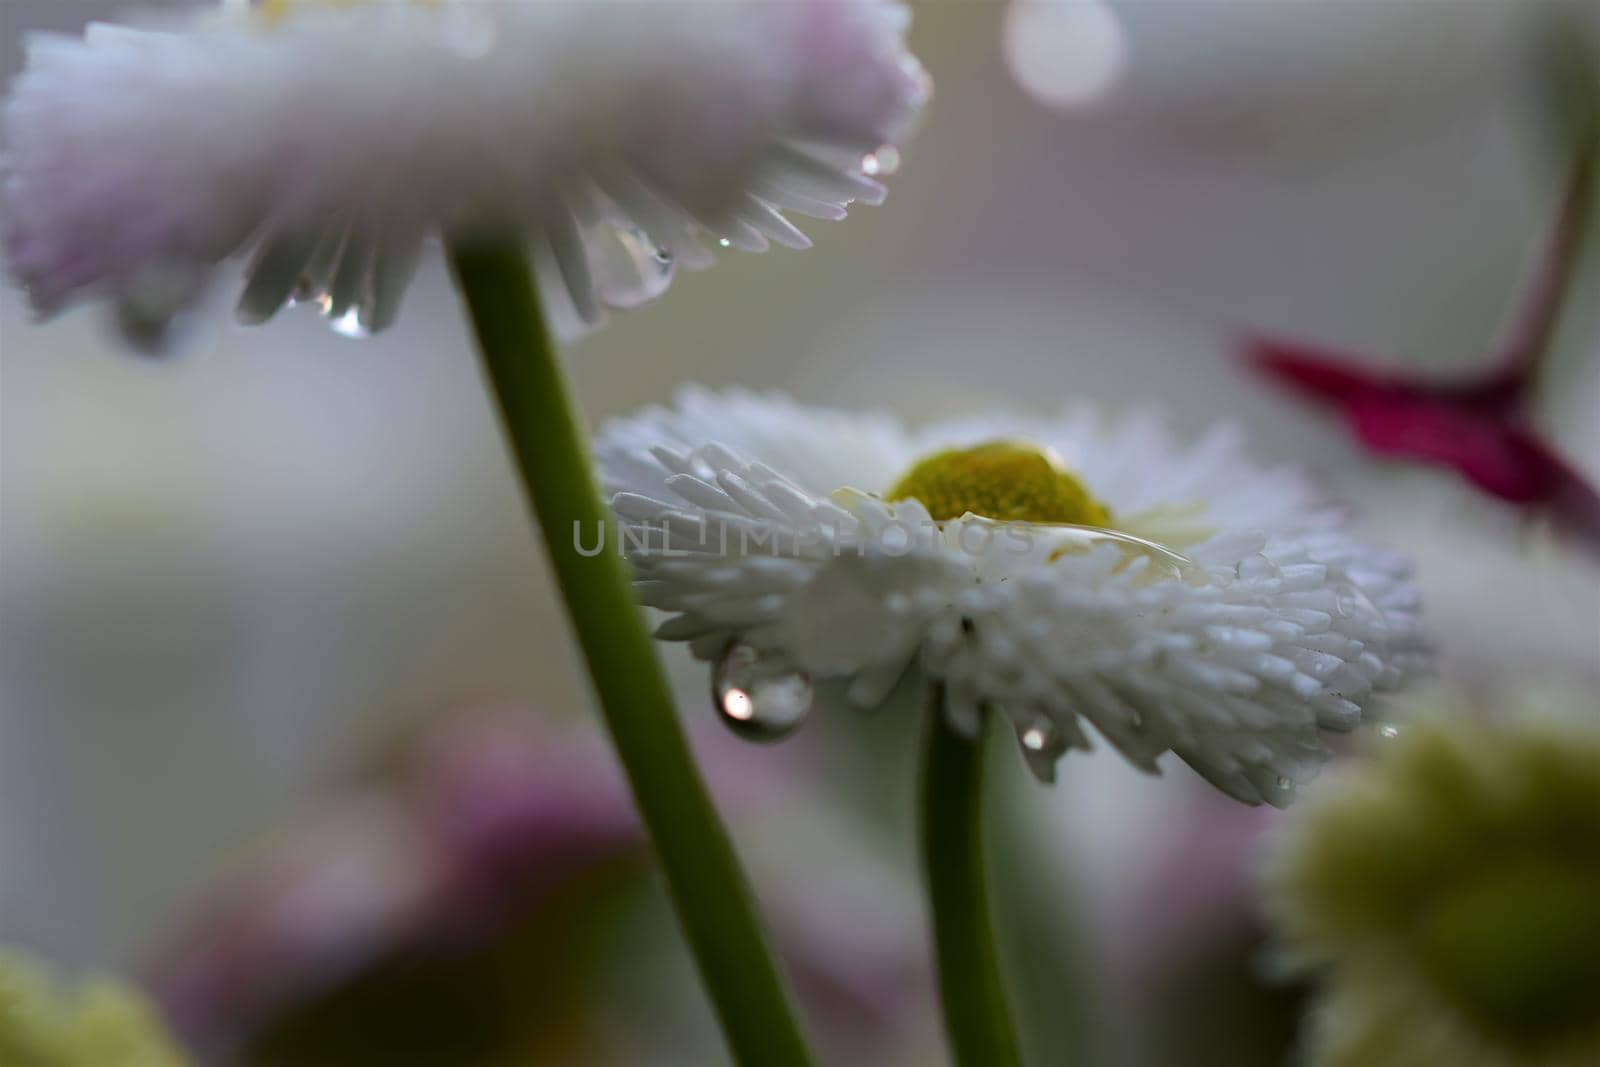 White Bellis Perennis after rain as a close up by Luise123